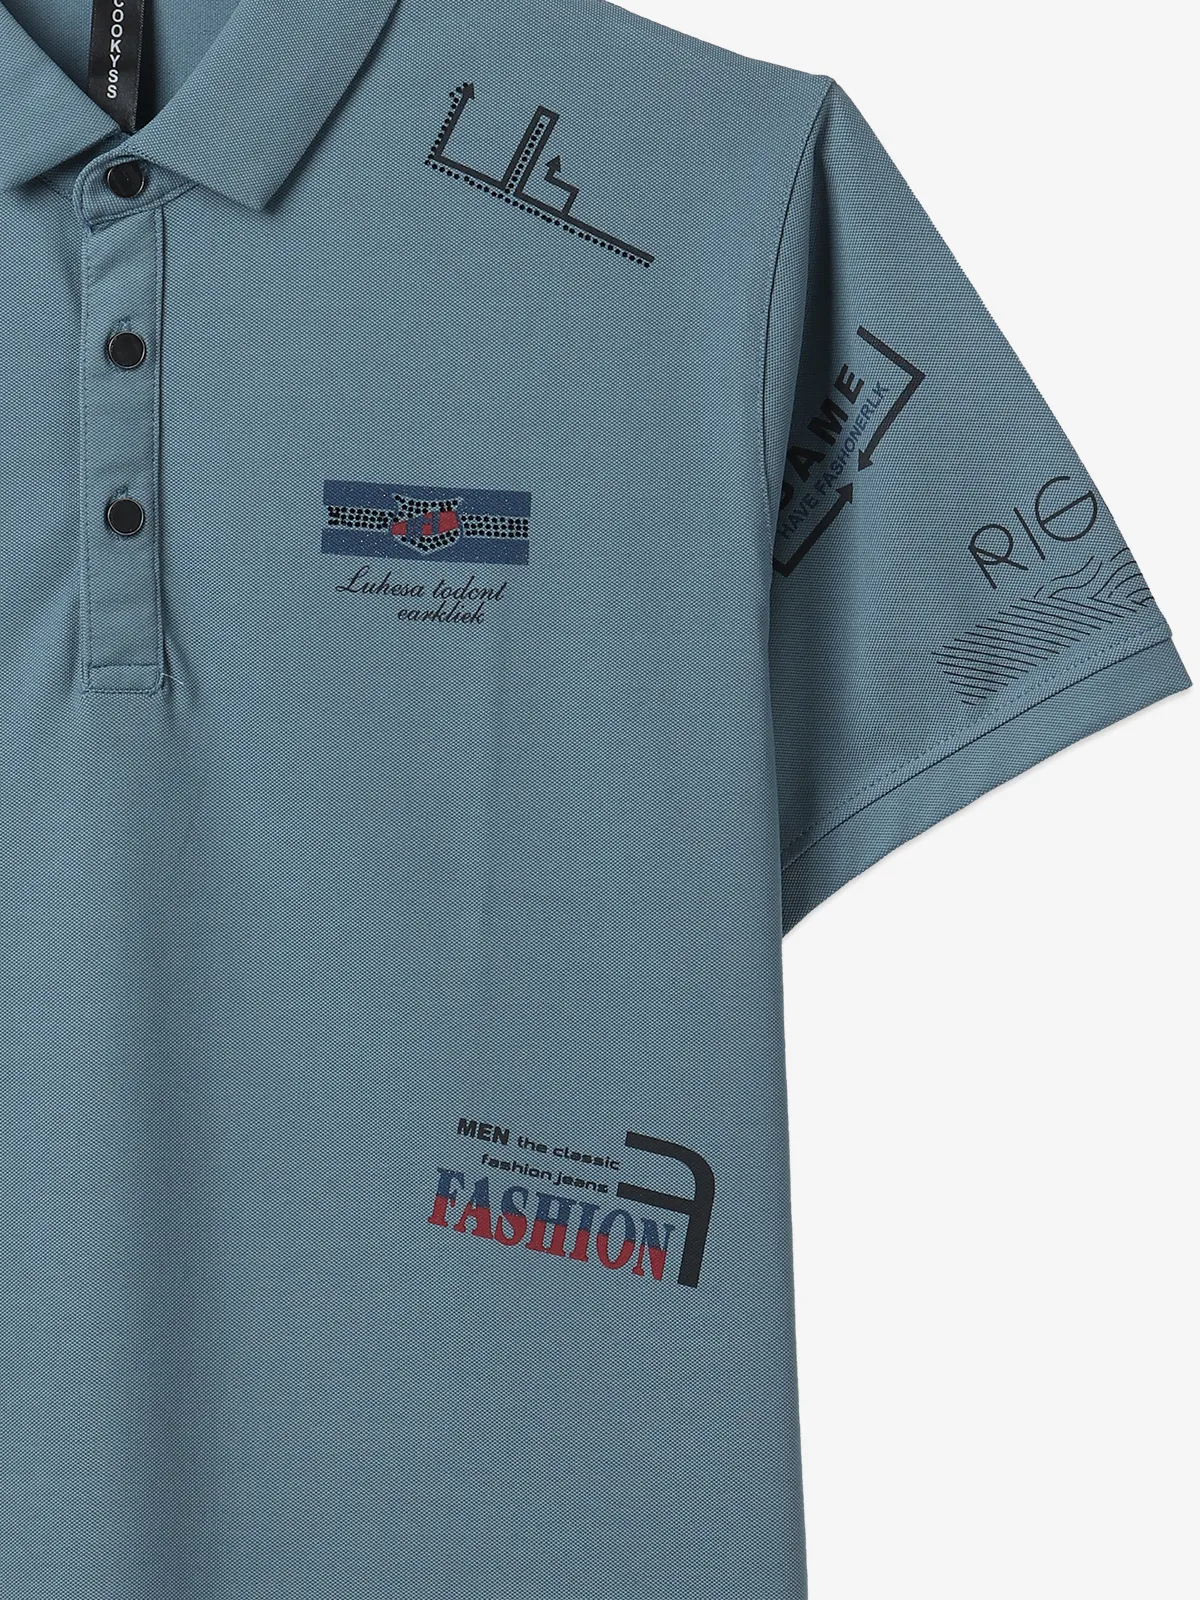 COOKYSS stone blue printed polo t-shirt